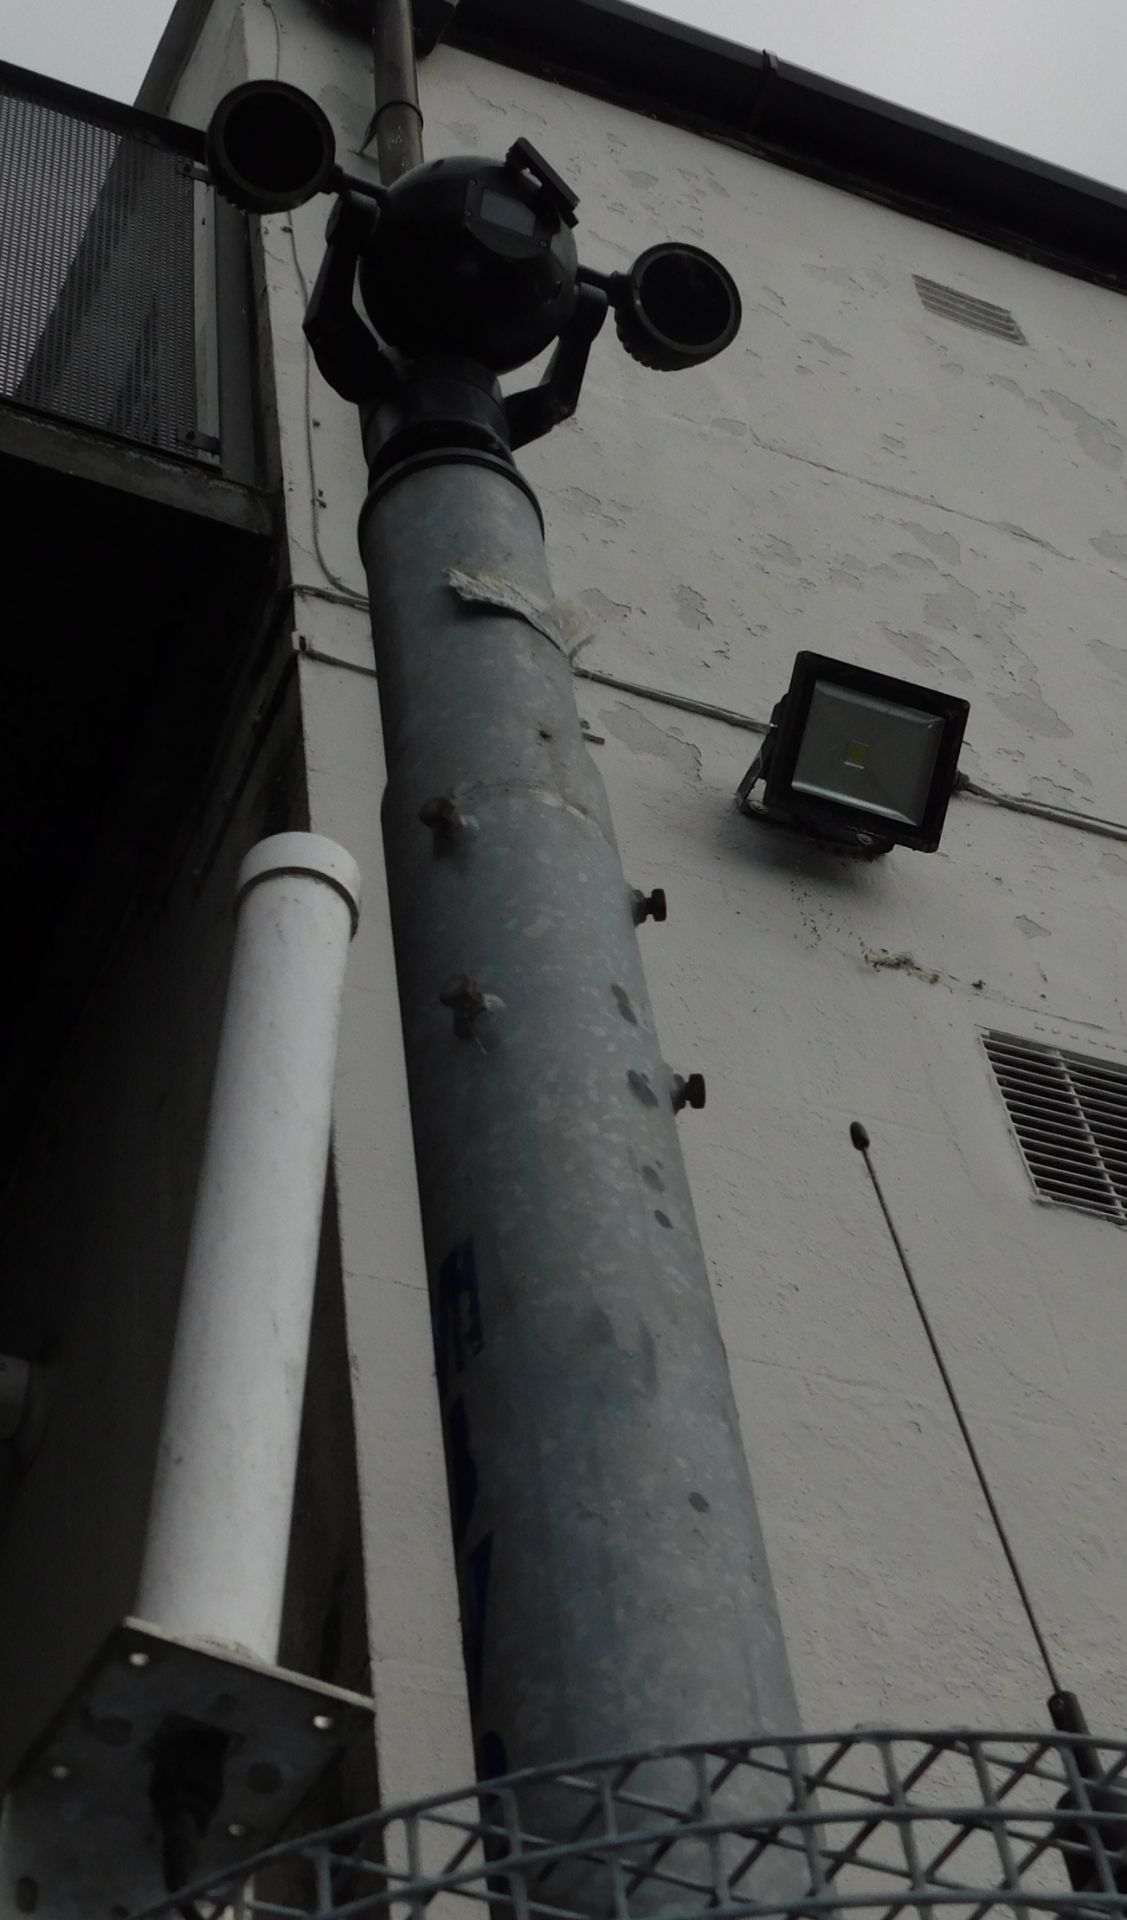 V-Ceptor 7m Trailer Mounted Self Contained Rapid Response CCTV Tower with Motion Sensors & 360 - Image 7 of 10